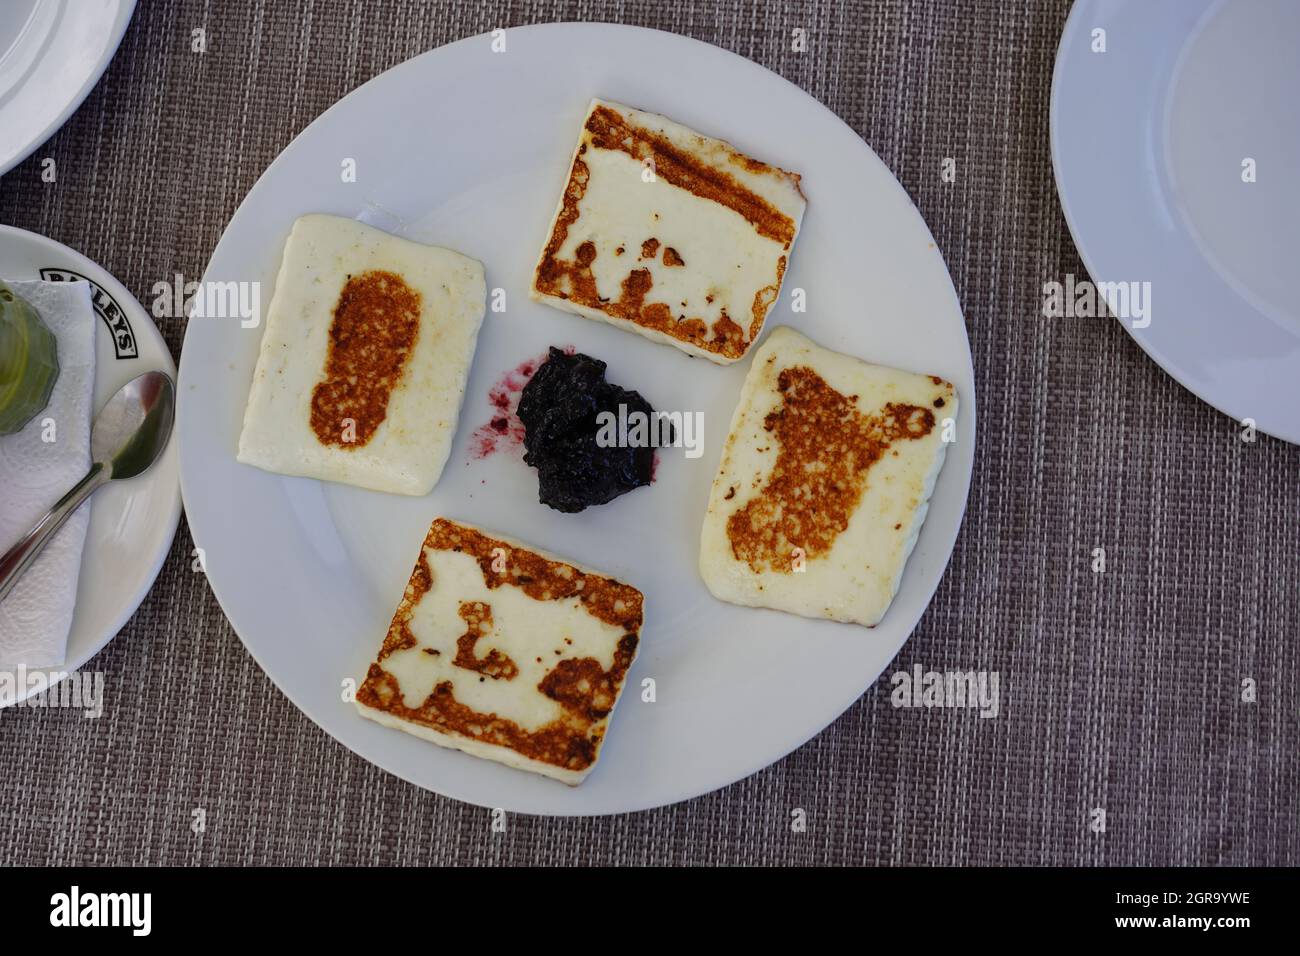 High Angle View Of Grilled Goat Cheese With Stewed Cranberries Served, Tenerife, Canary Islands Stock Photo